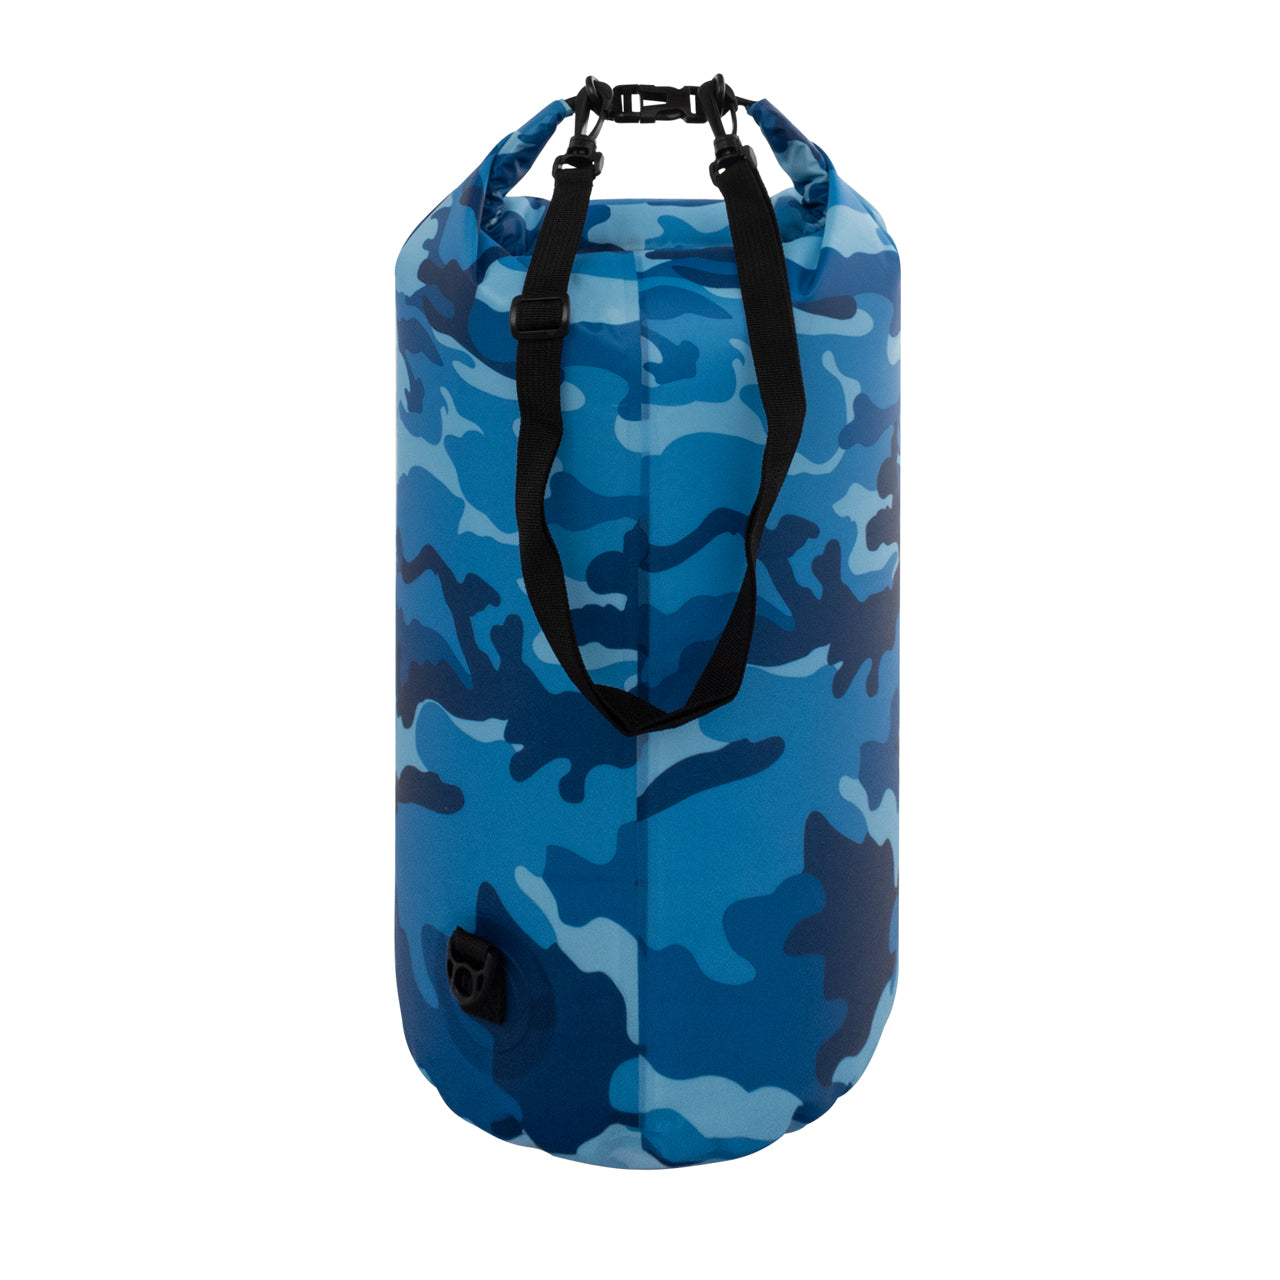 TrailGear 20 liter Heavy-Duty Camouflaged Dry Bag in the blue camo variation.